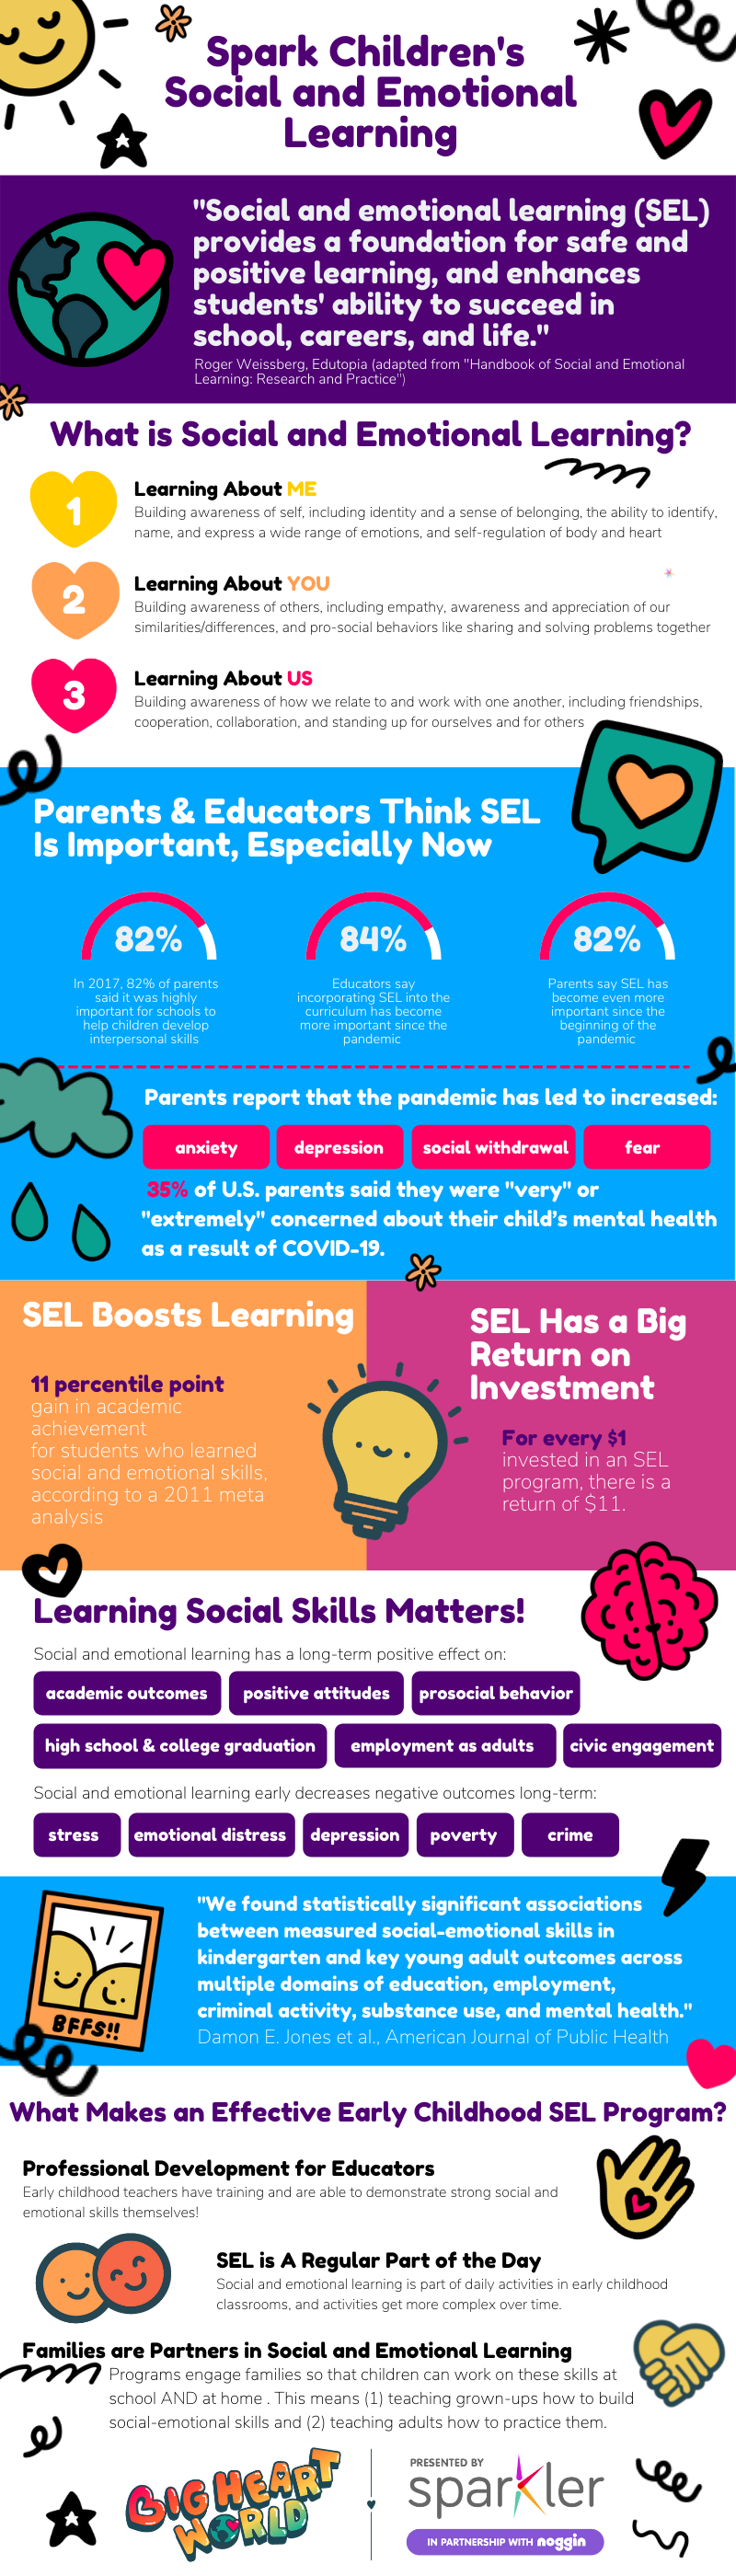 Big Heart SEL InfoGraphic (800 x 2800 px)